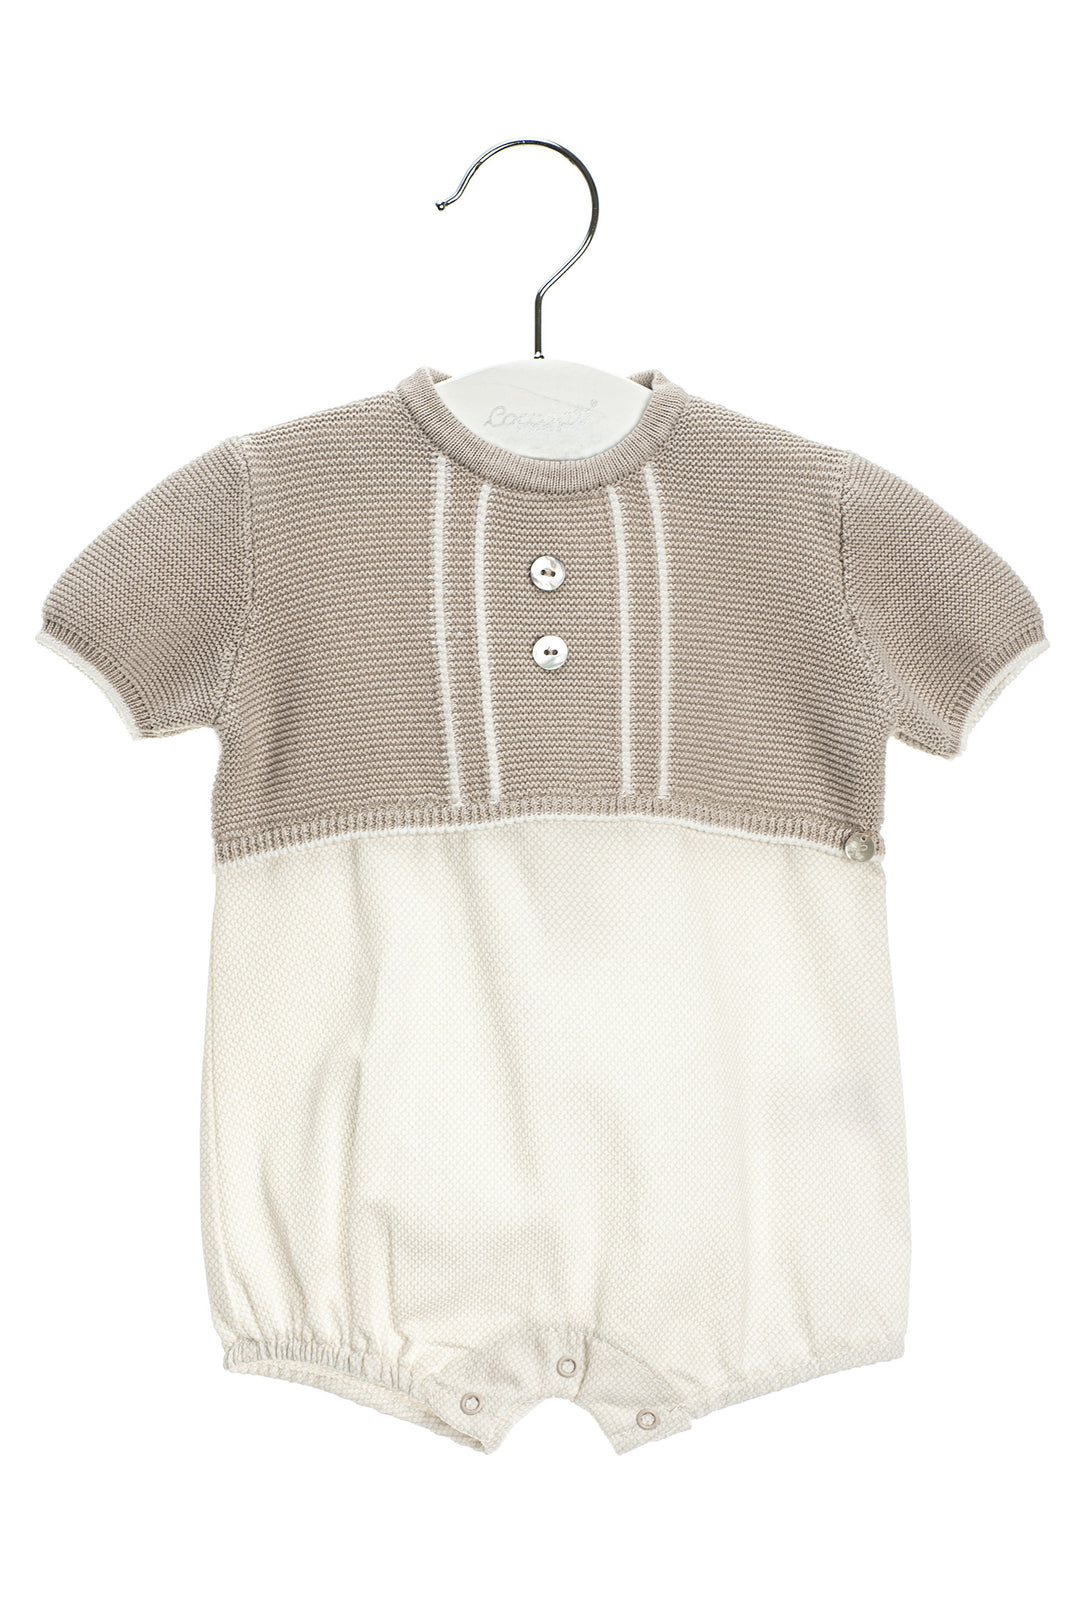 Coccodè "Cecil" Sand Half Knit Romper | iphoneandroidapplications